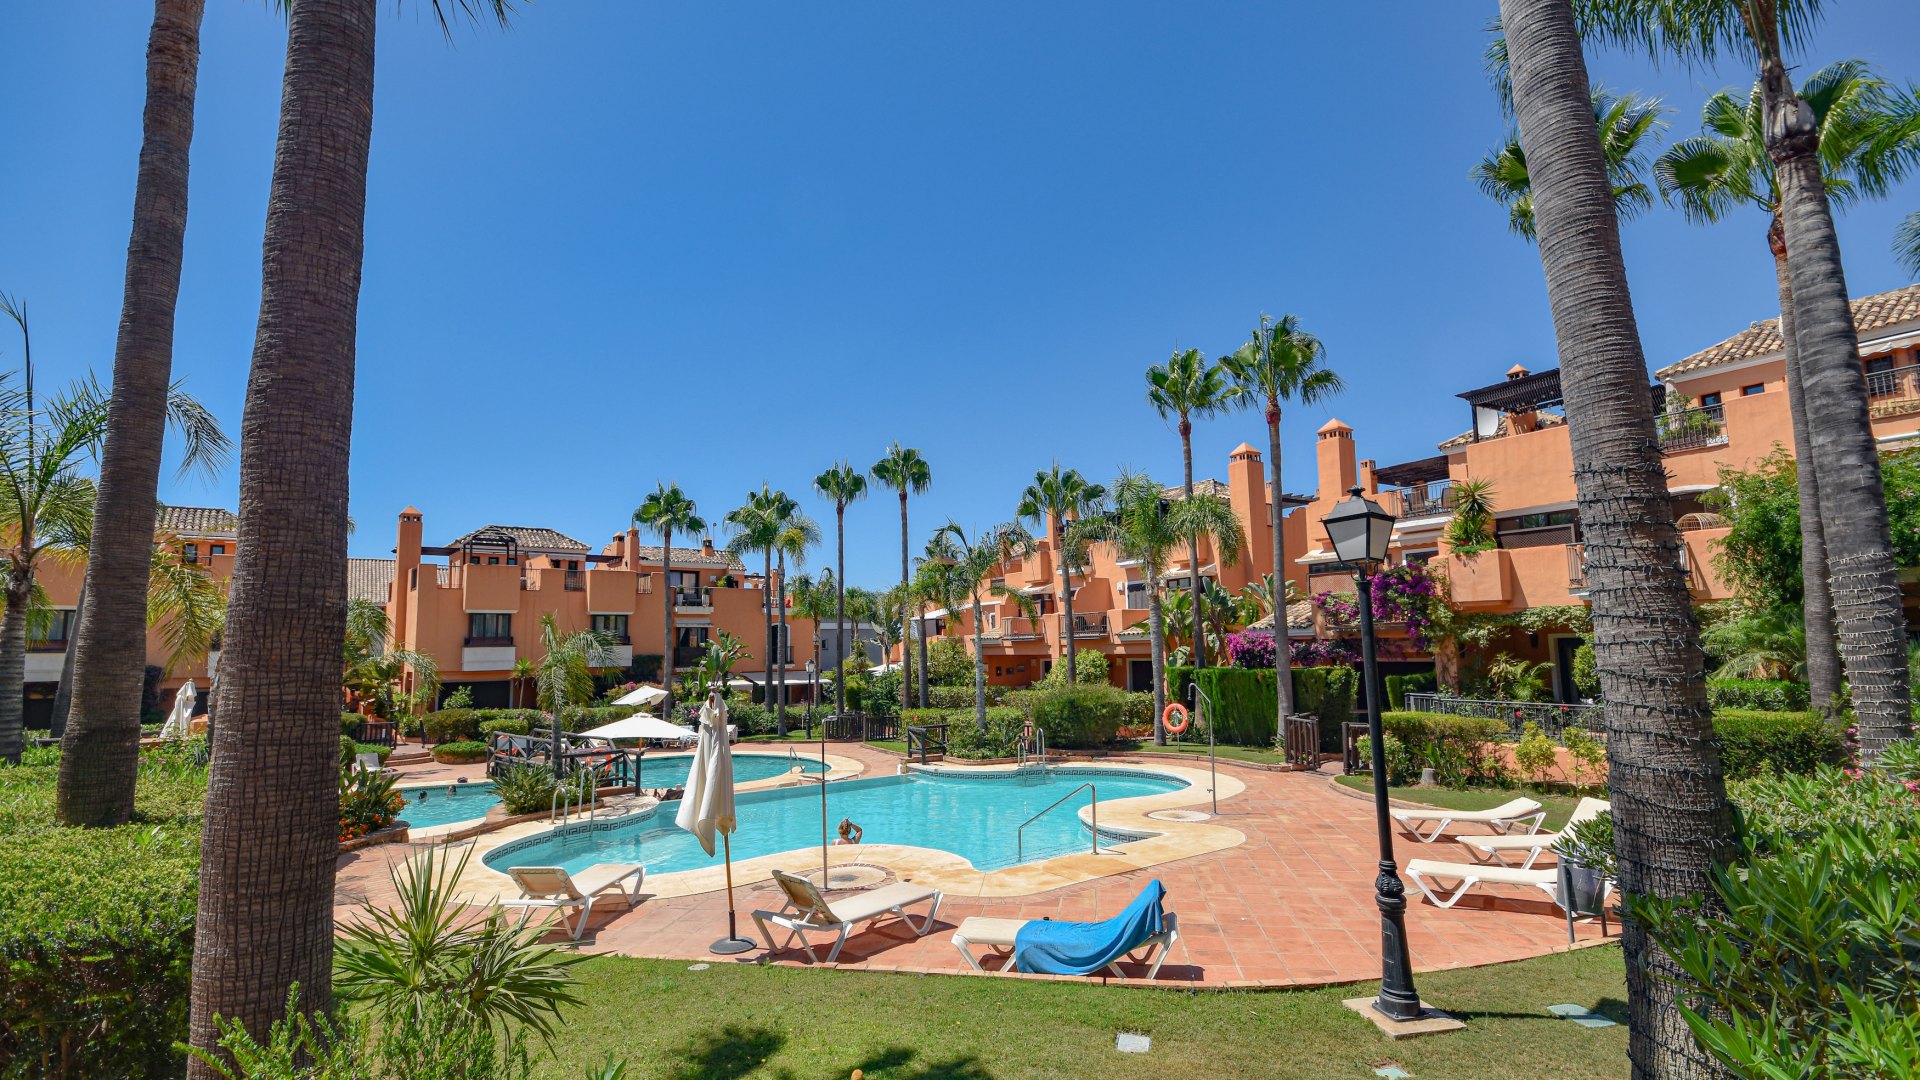 Charming 2 bedroom vacation home next to the beach, Marbella